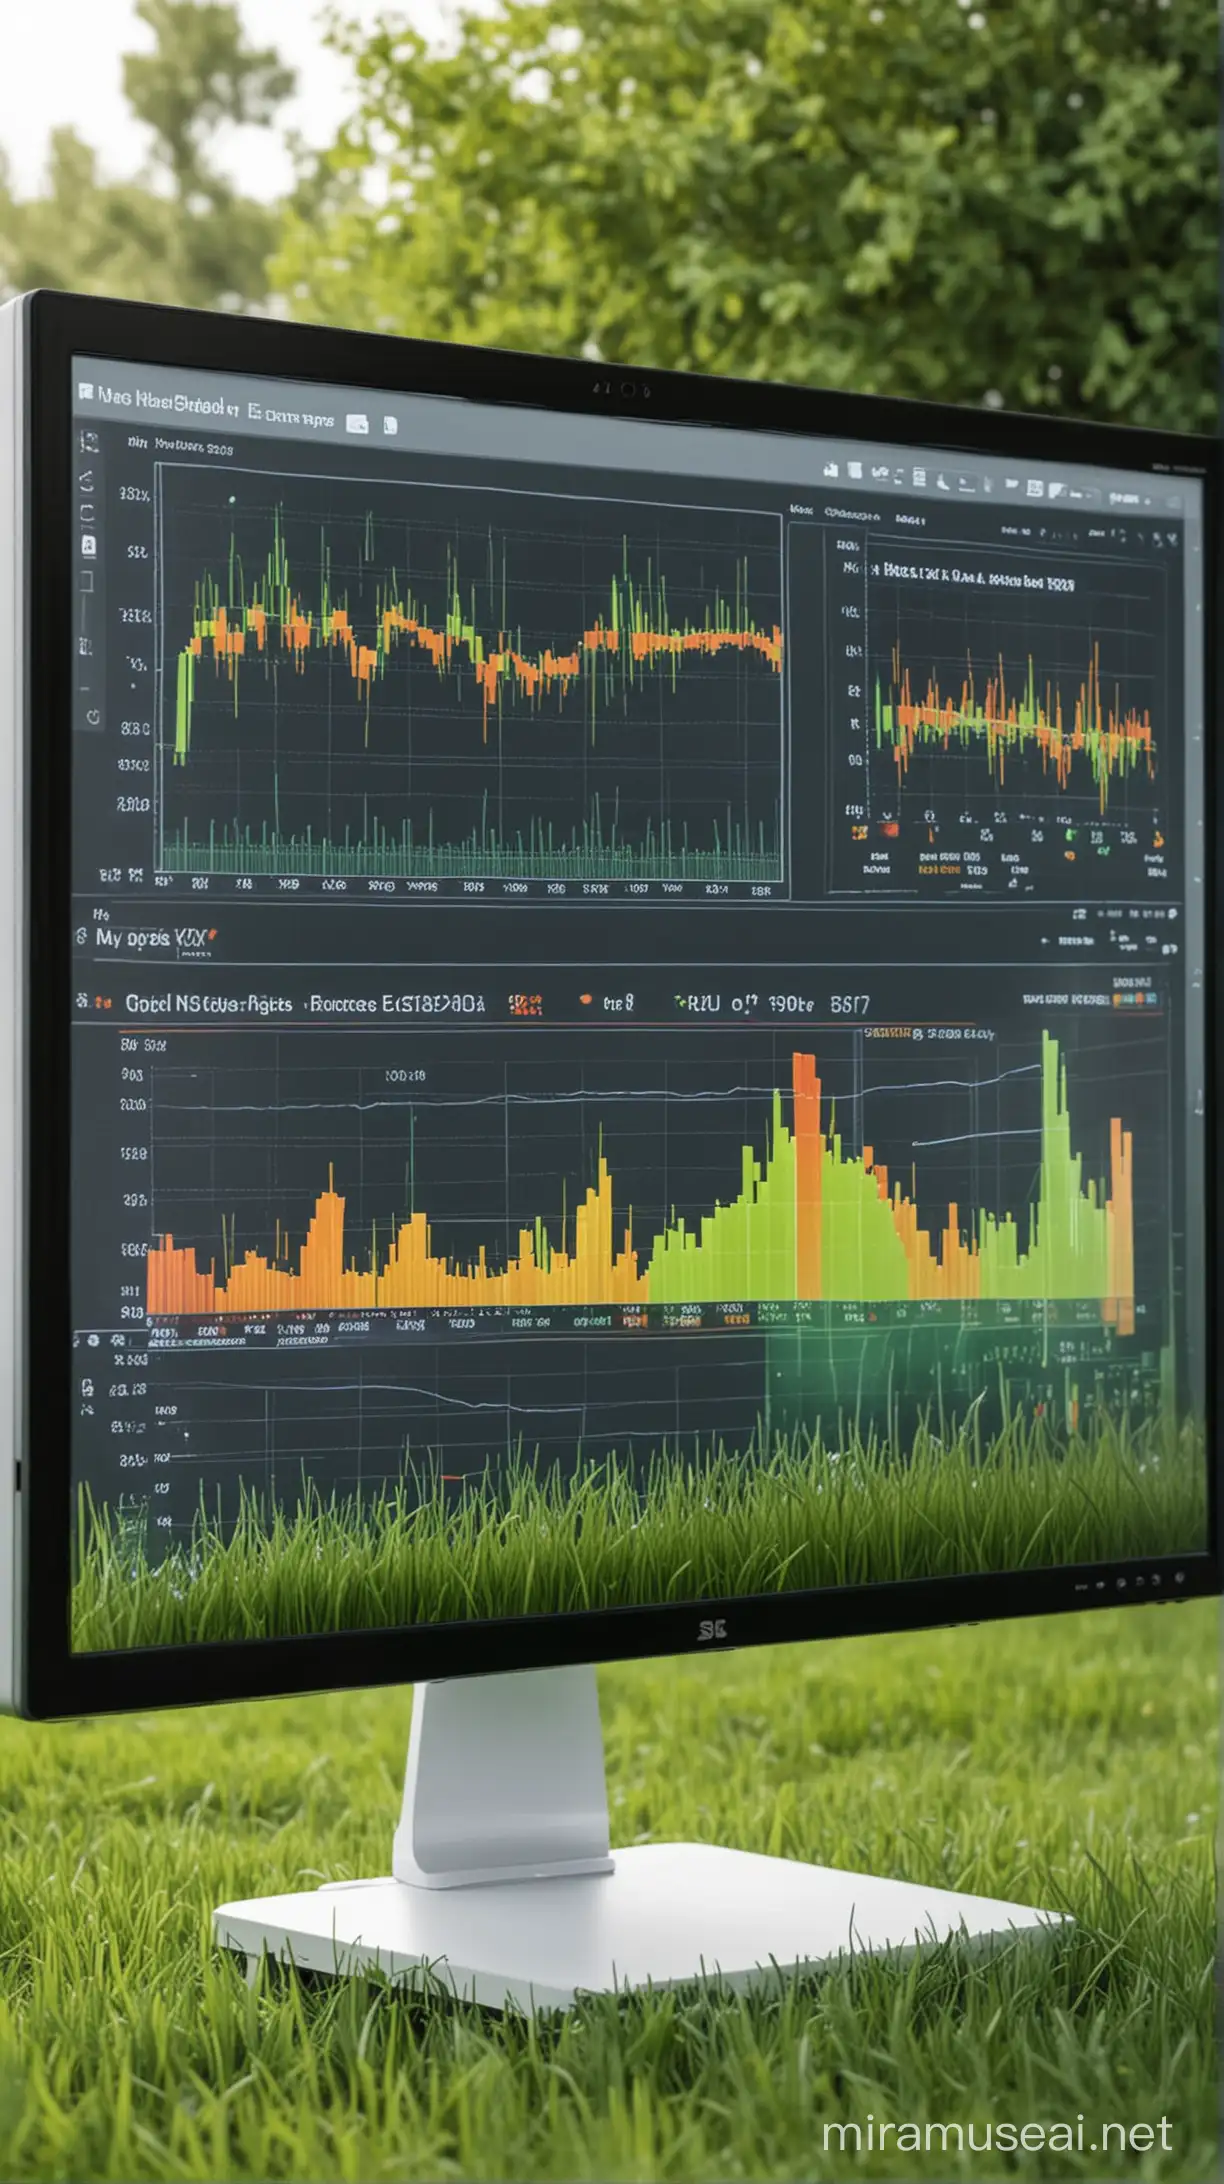 Minimalistic PC Monitor Predicting Share Prices with Bright Graphs